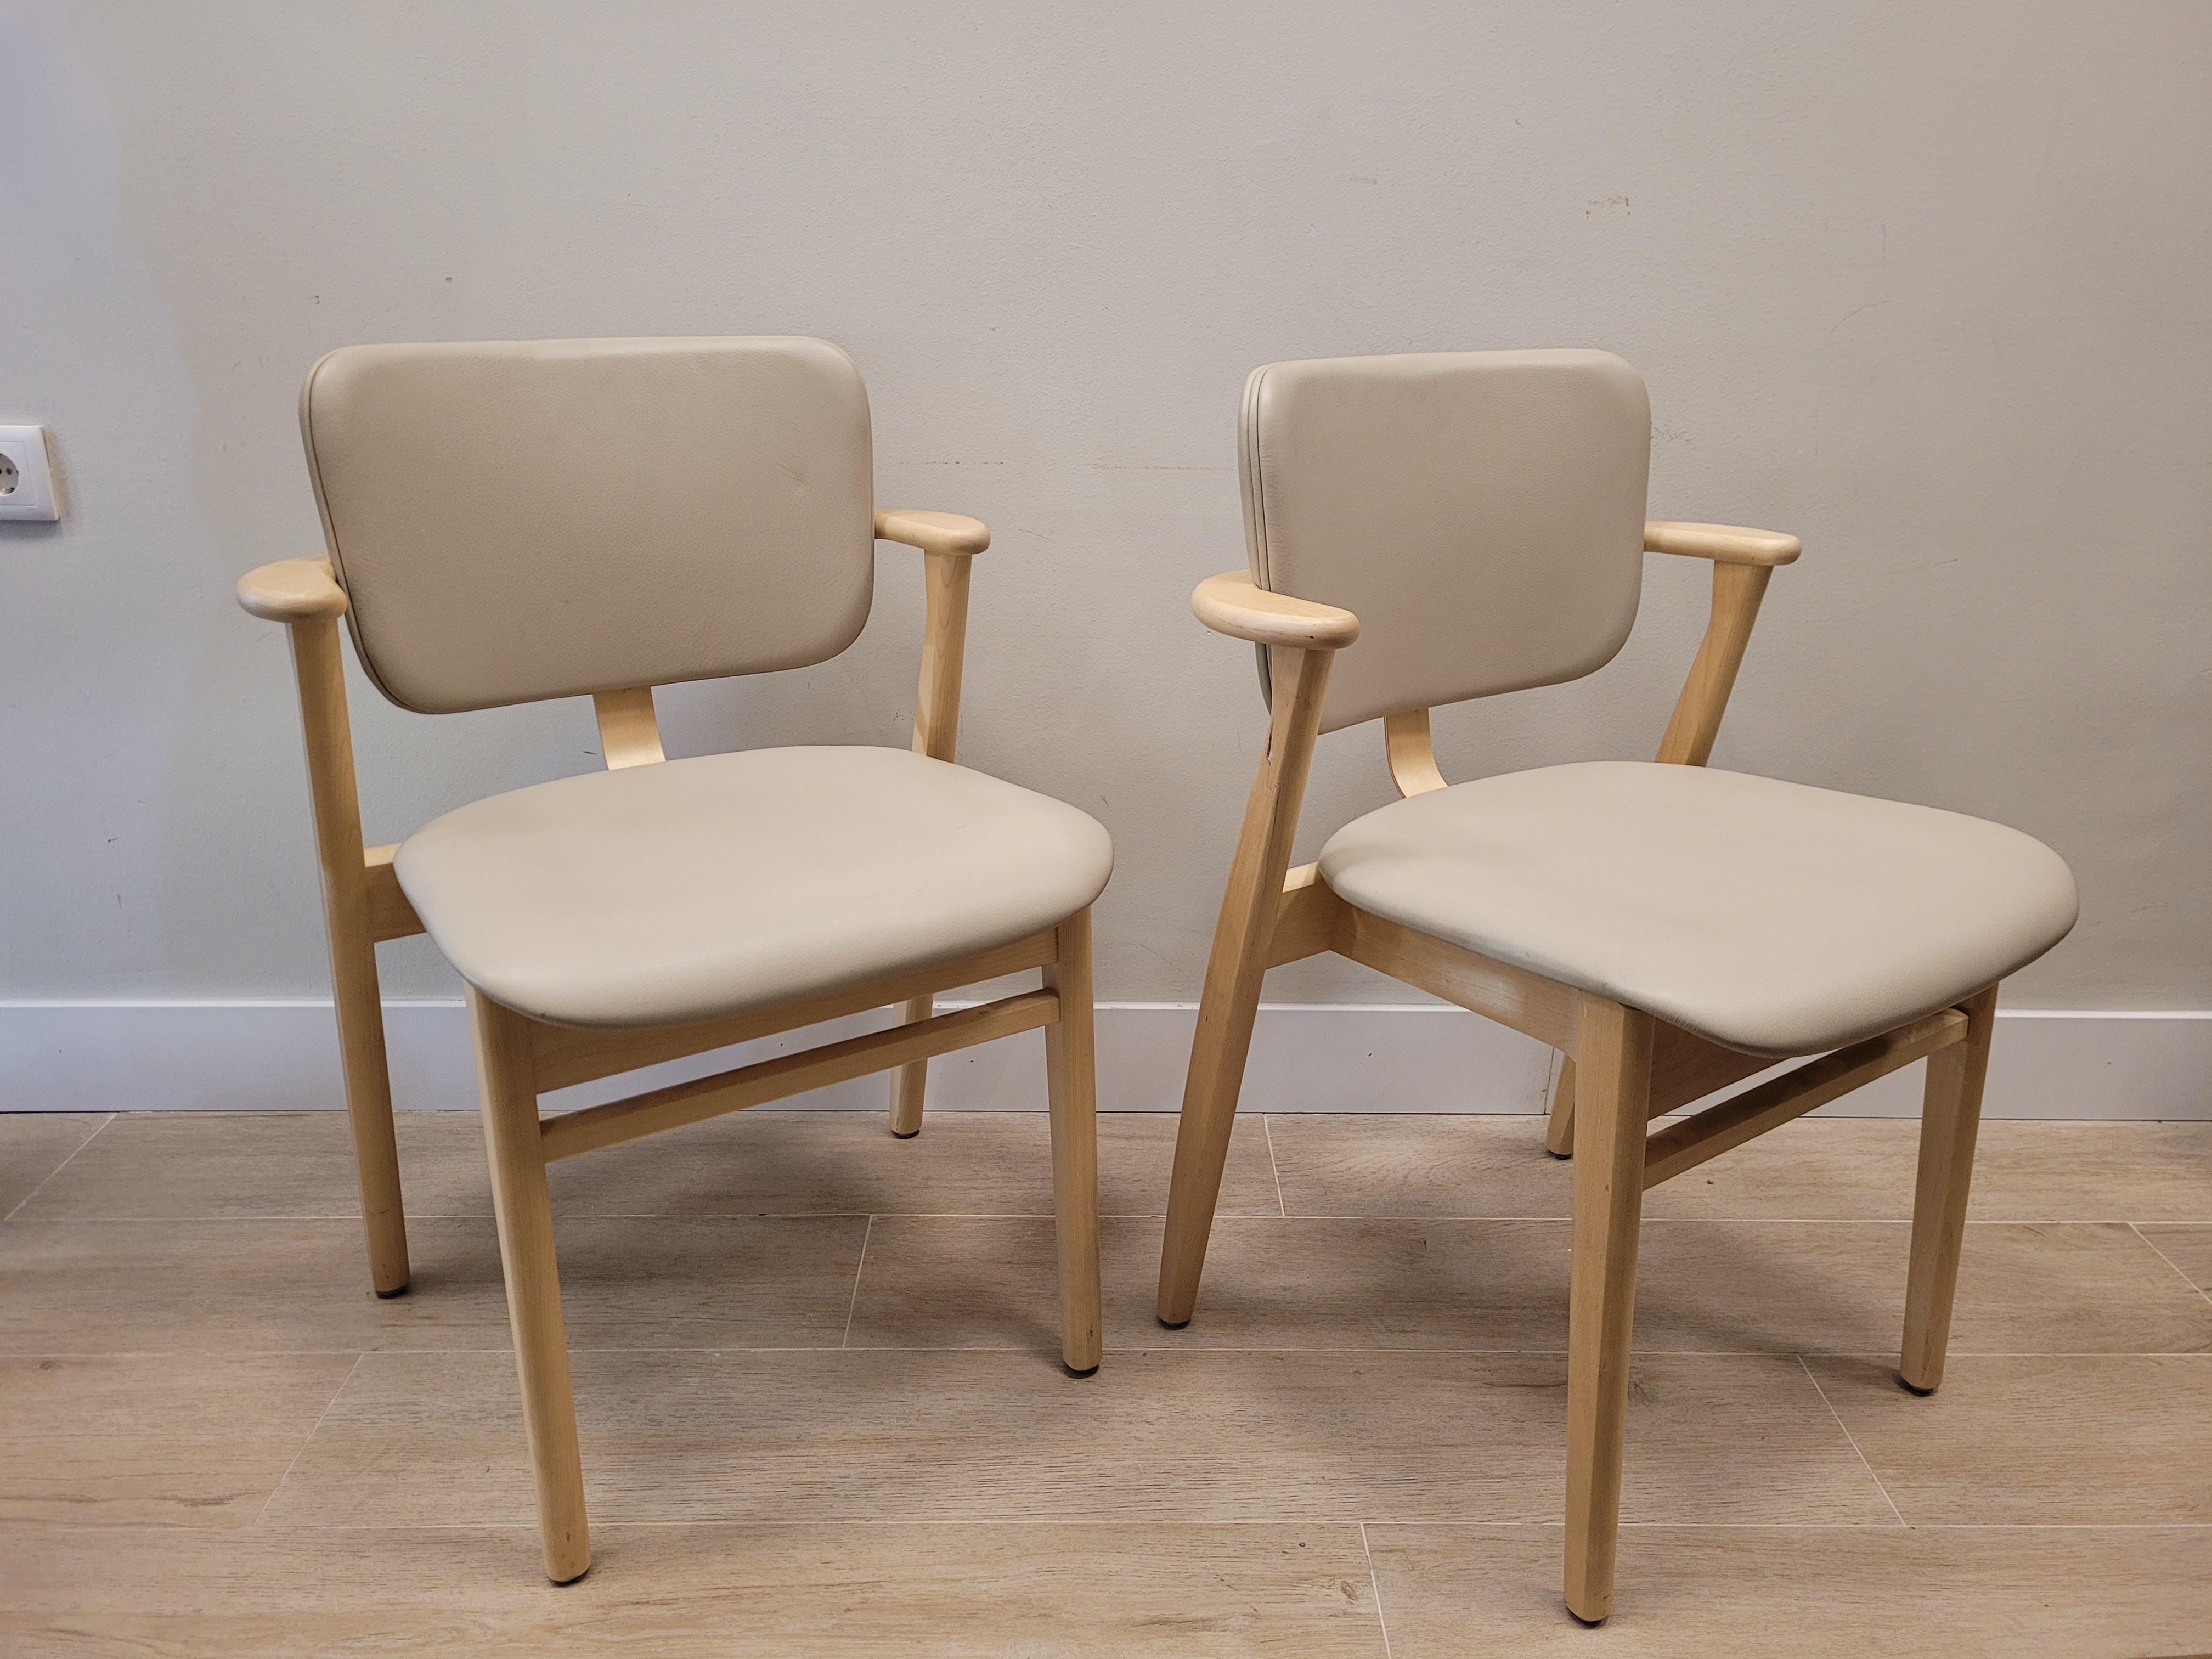 Beautiful Chair of DOMUS model chairs, designed by Ilmari Tapiovaara, with birch structure, seat and back in beige leather. It was created in 1946 as part of the furniture for the Domus Academica student housing complex in Helsinki, soon becoming a